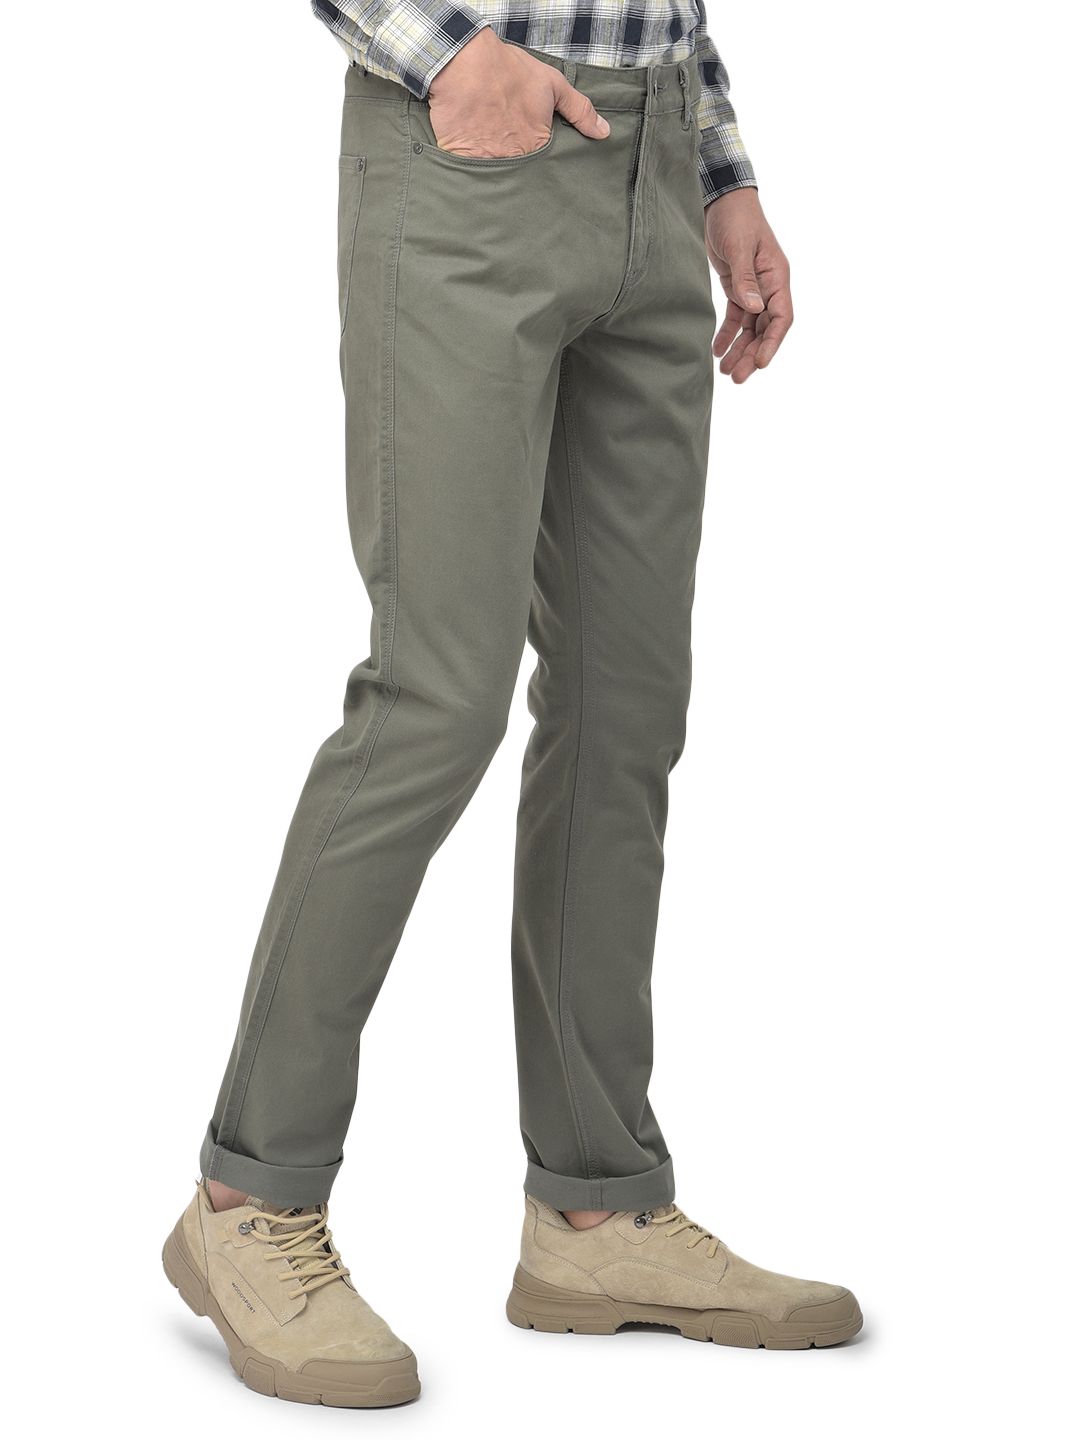 Woods SLATE GREY Chinos Trouser